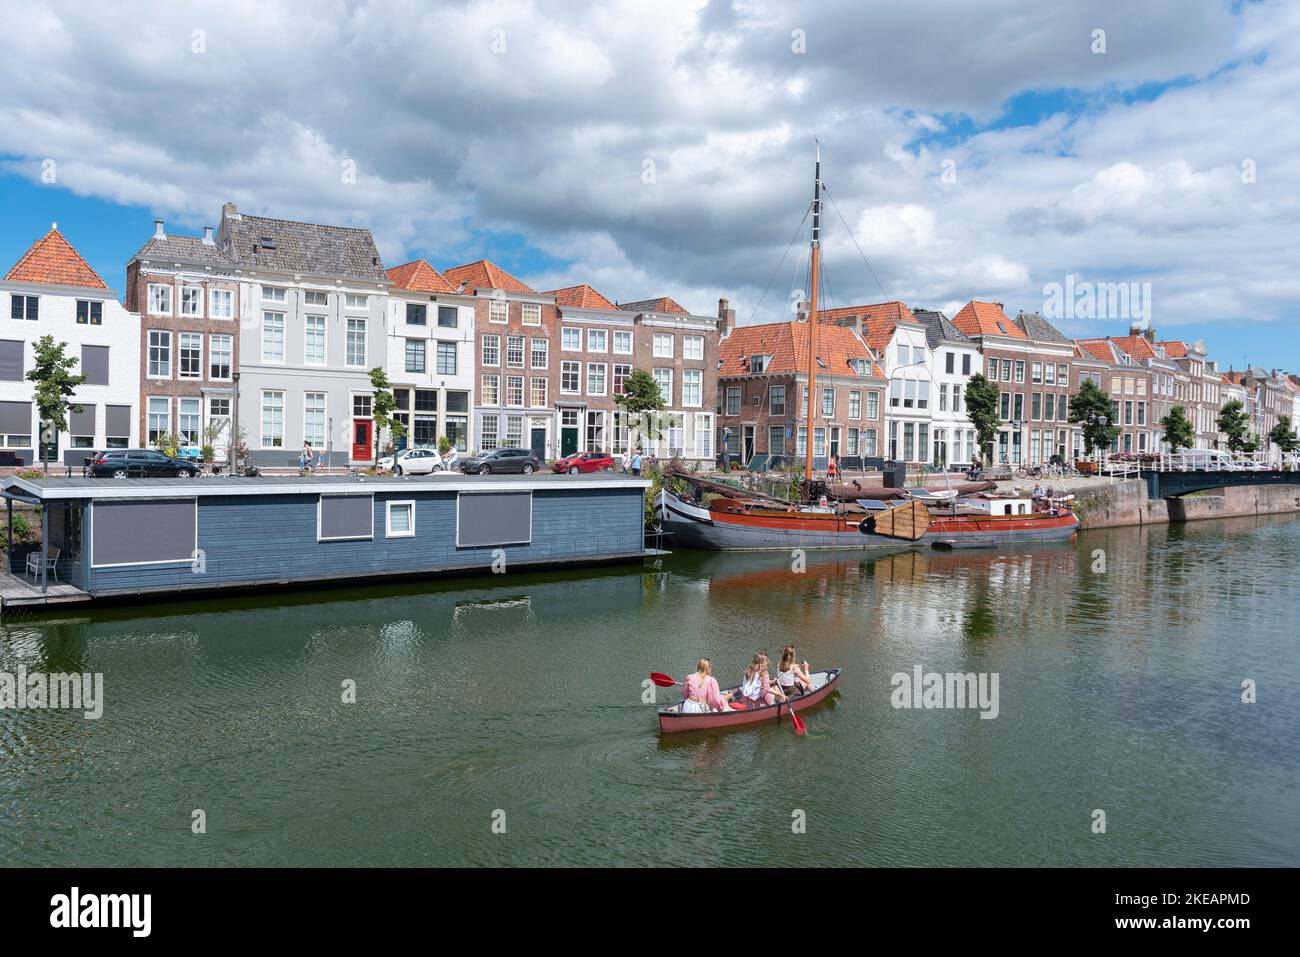 Canoe in front of historic house facades and houseboats on the Londensekaai, Middelburg, Zeeland, Netherlands, Europe Stock Photo